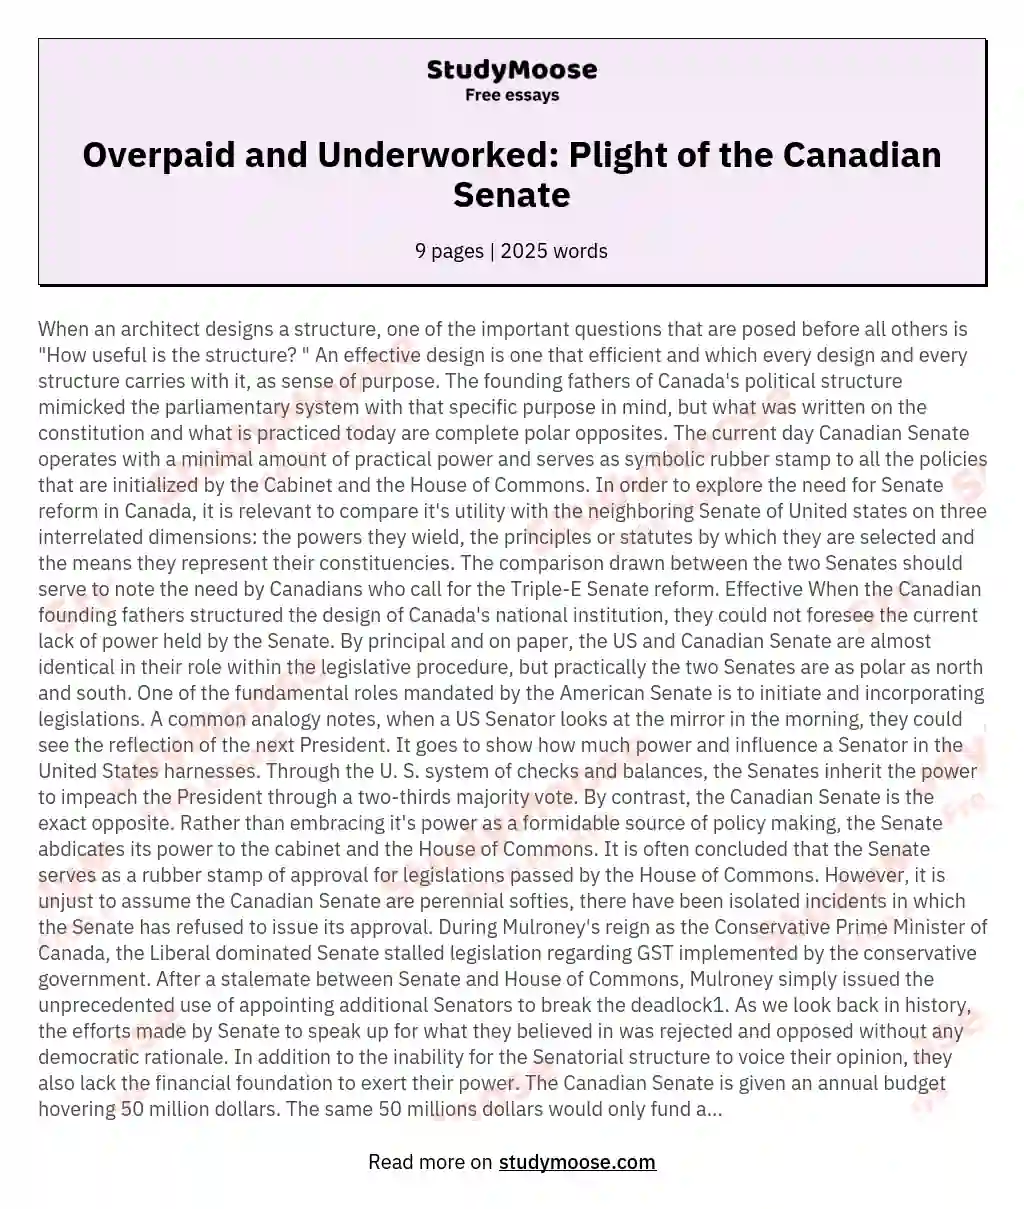 Overpaid and Underworked: Plight of the Canadian Senate